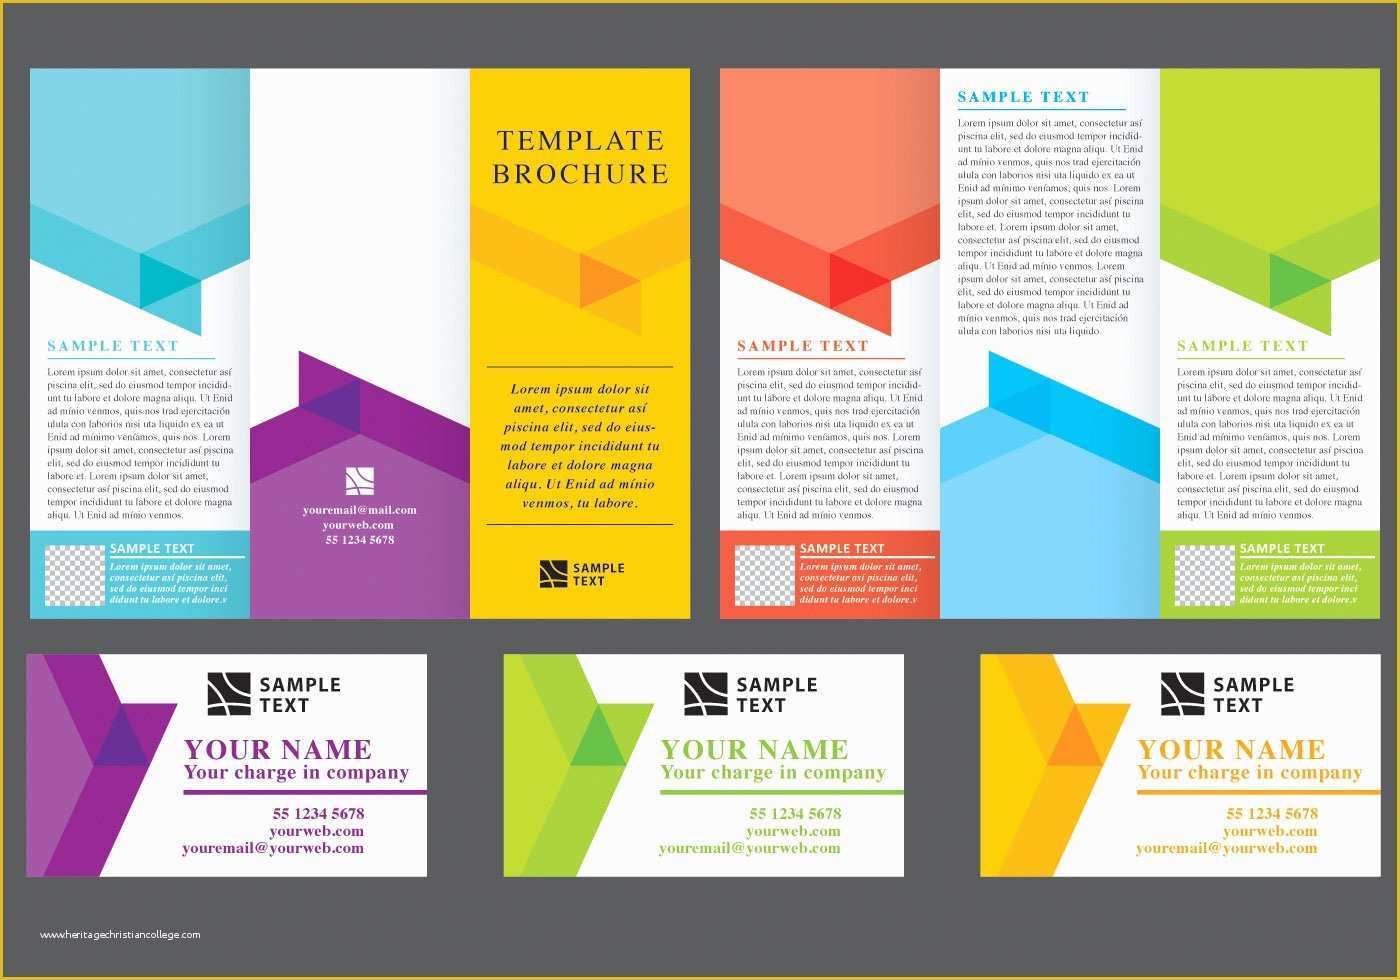 Free Templates for Flyers and Brochures Of Chevron Fold Brochure Vectors Download Free Vector Art